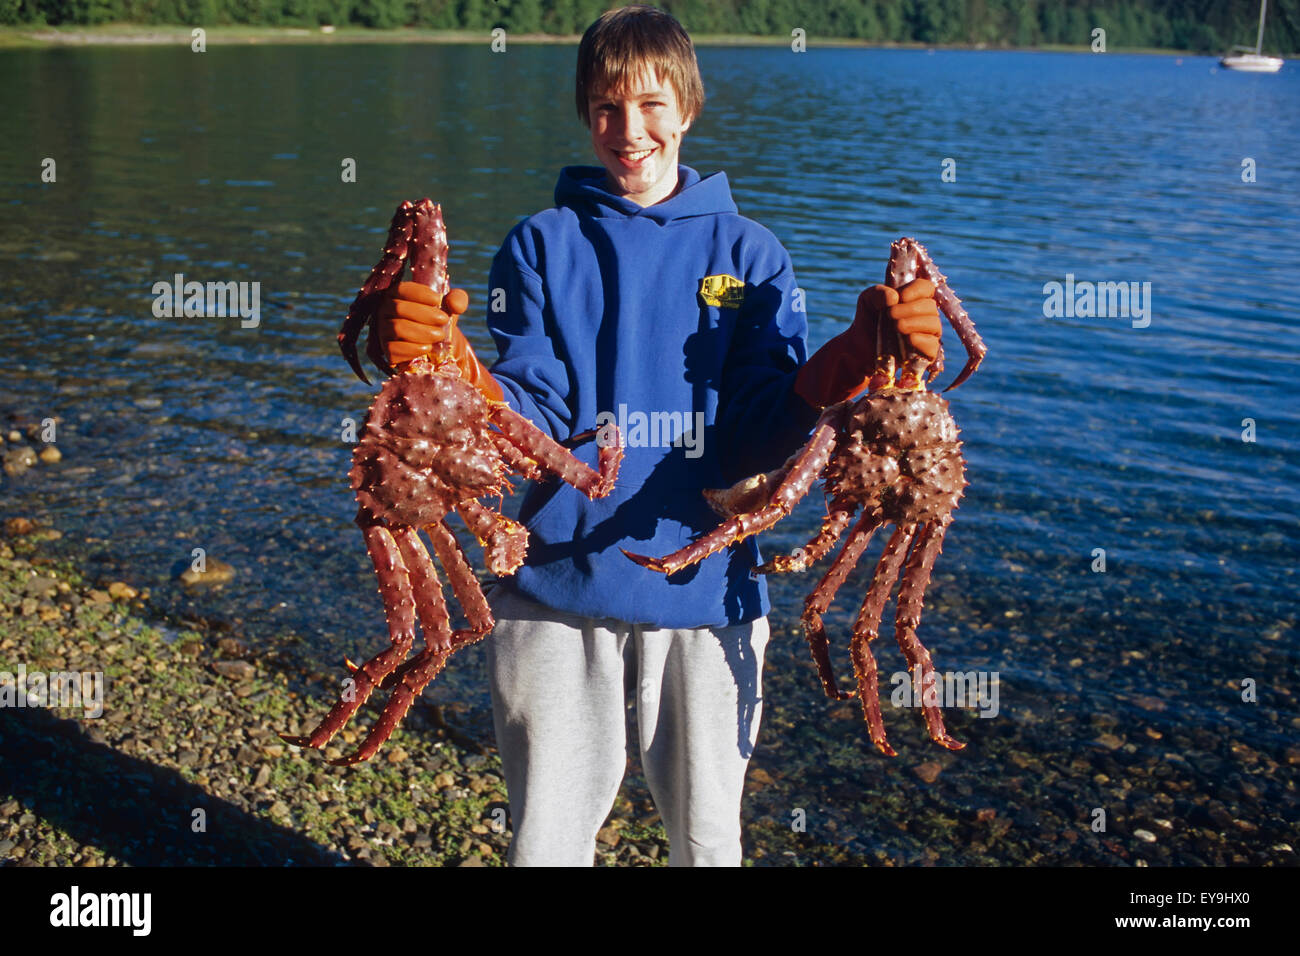 Young Boy Holding Large King Crabs Southeast Alaska Inside Passage Stock Photo